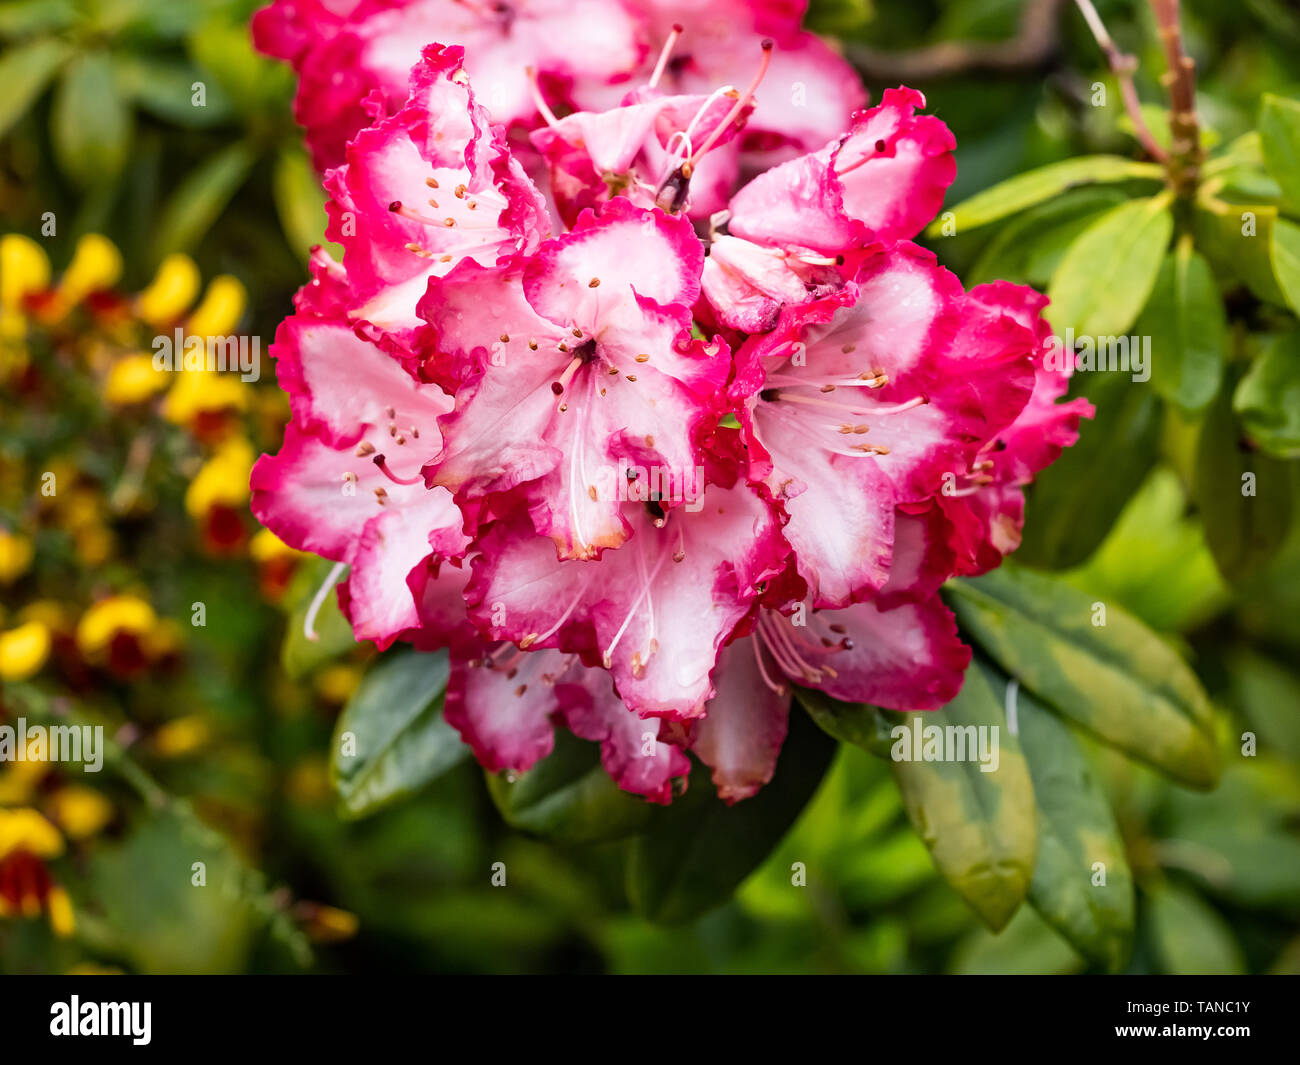 red and pink fringed azalea flowers bloom along a hedgerow along a Japanese apartment complex. Stock Photo